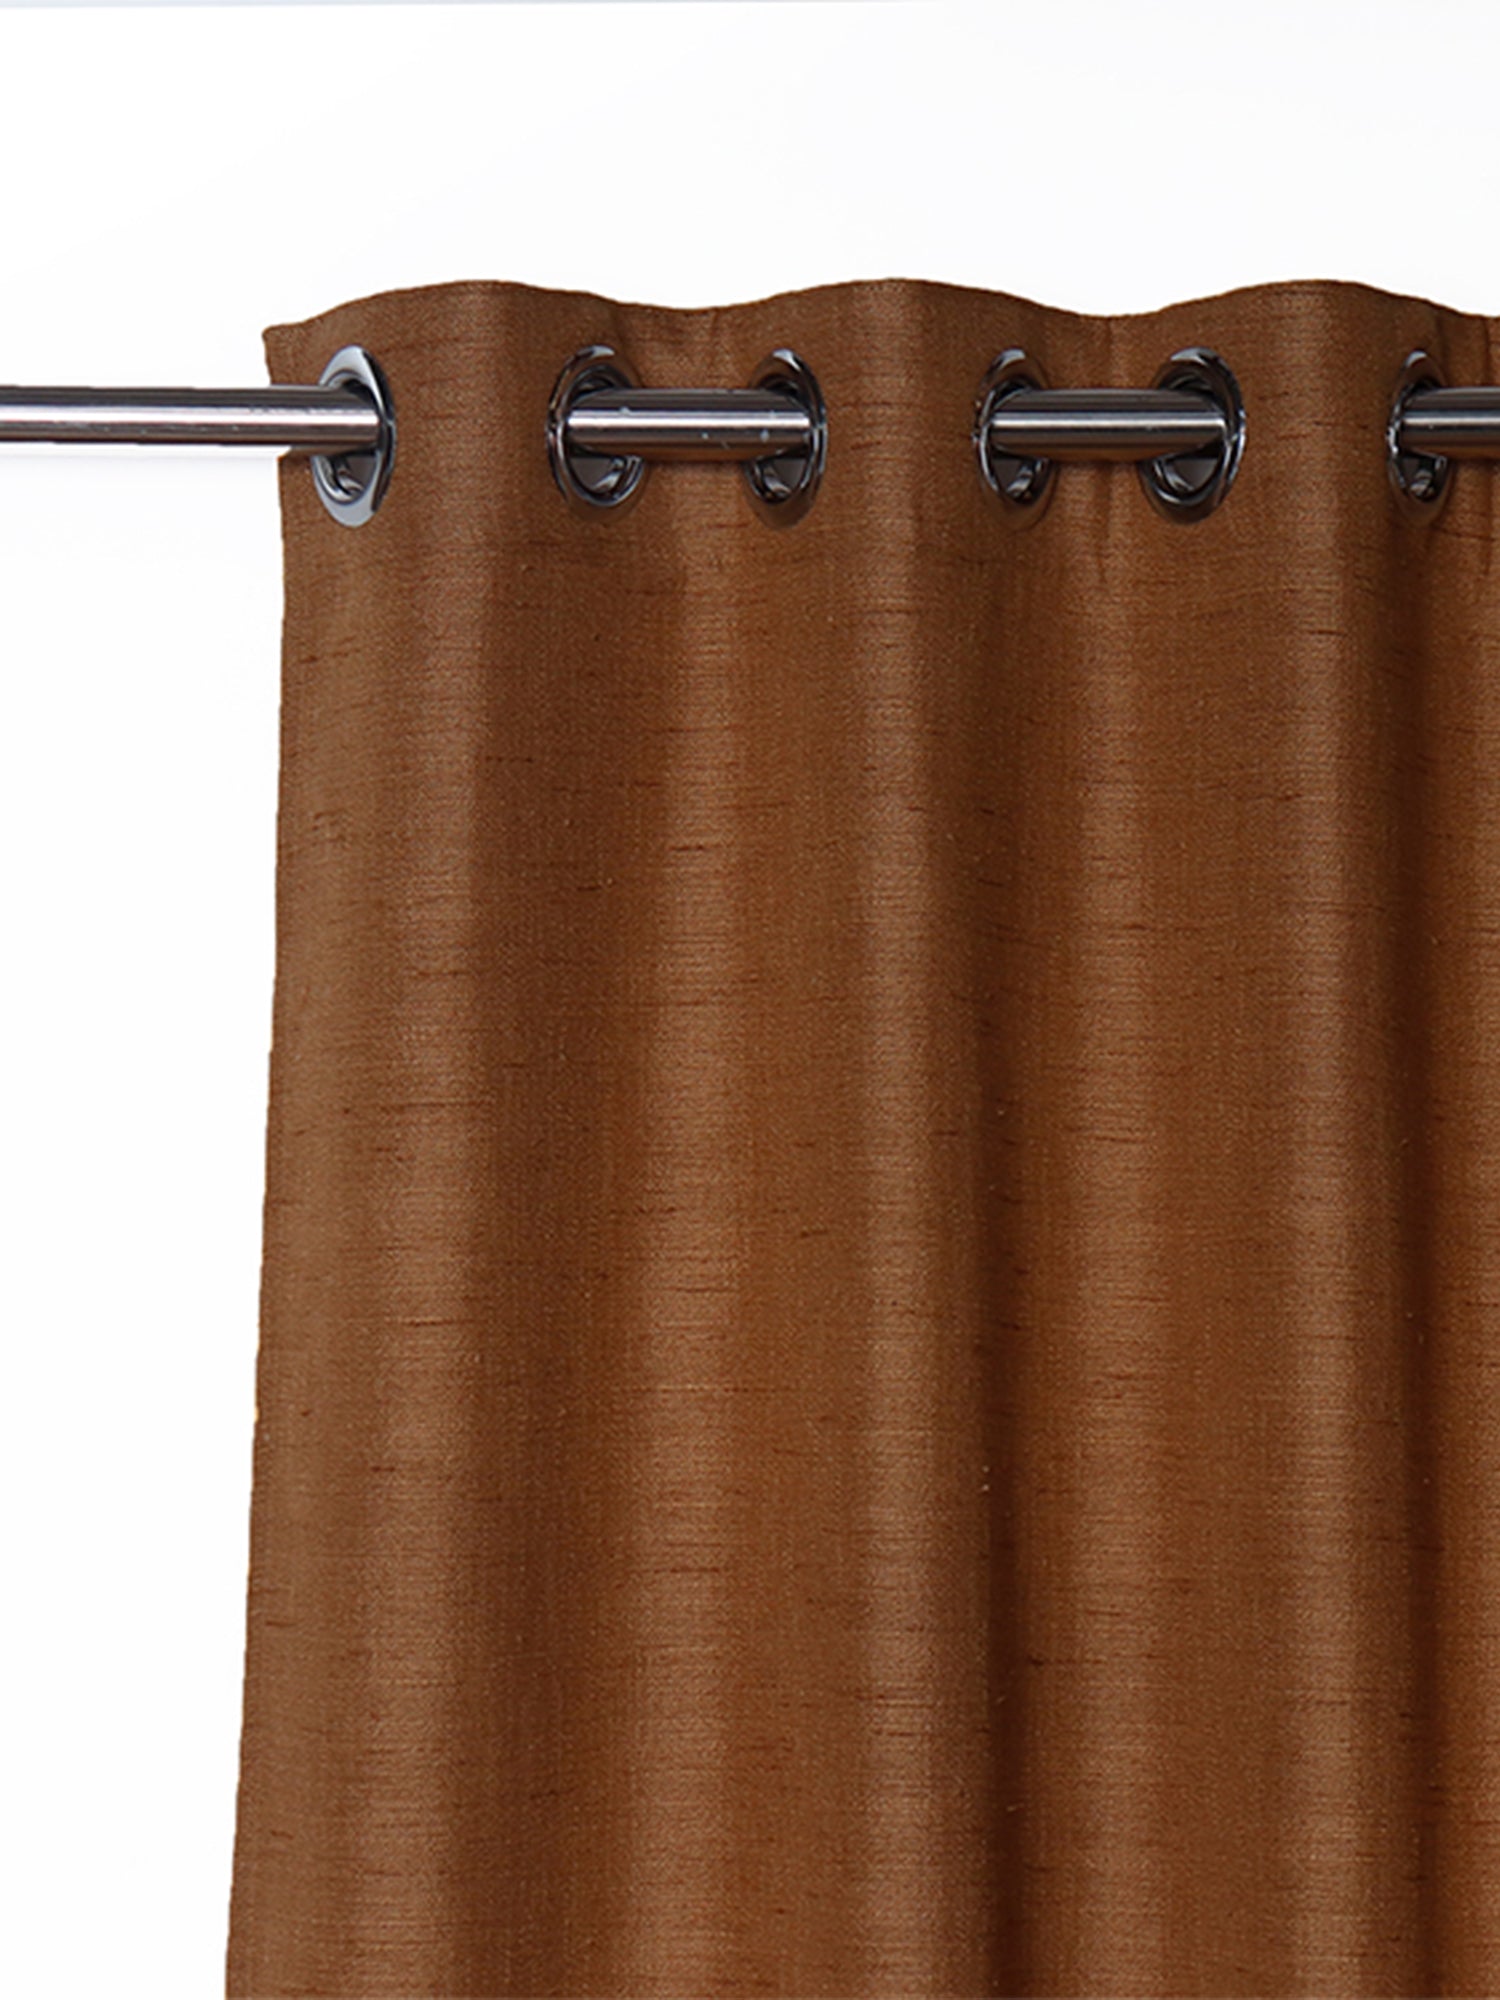 closeup of hanging curtain with eyelet and rod in ochre brown color - 54x84 inch